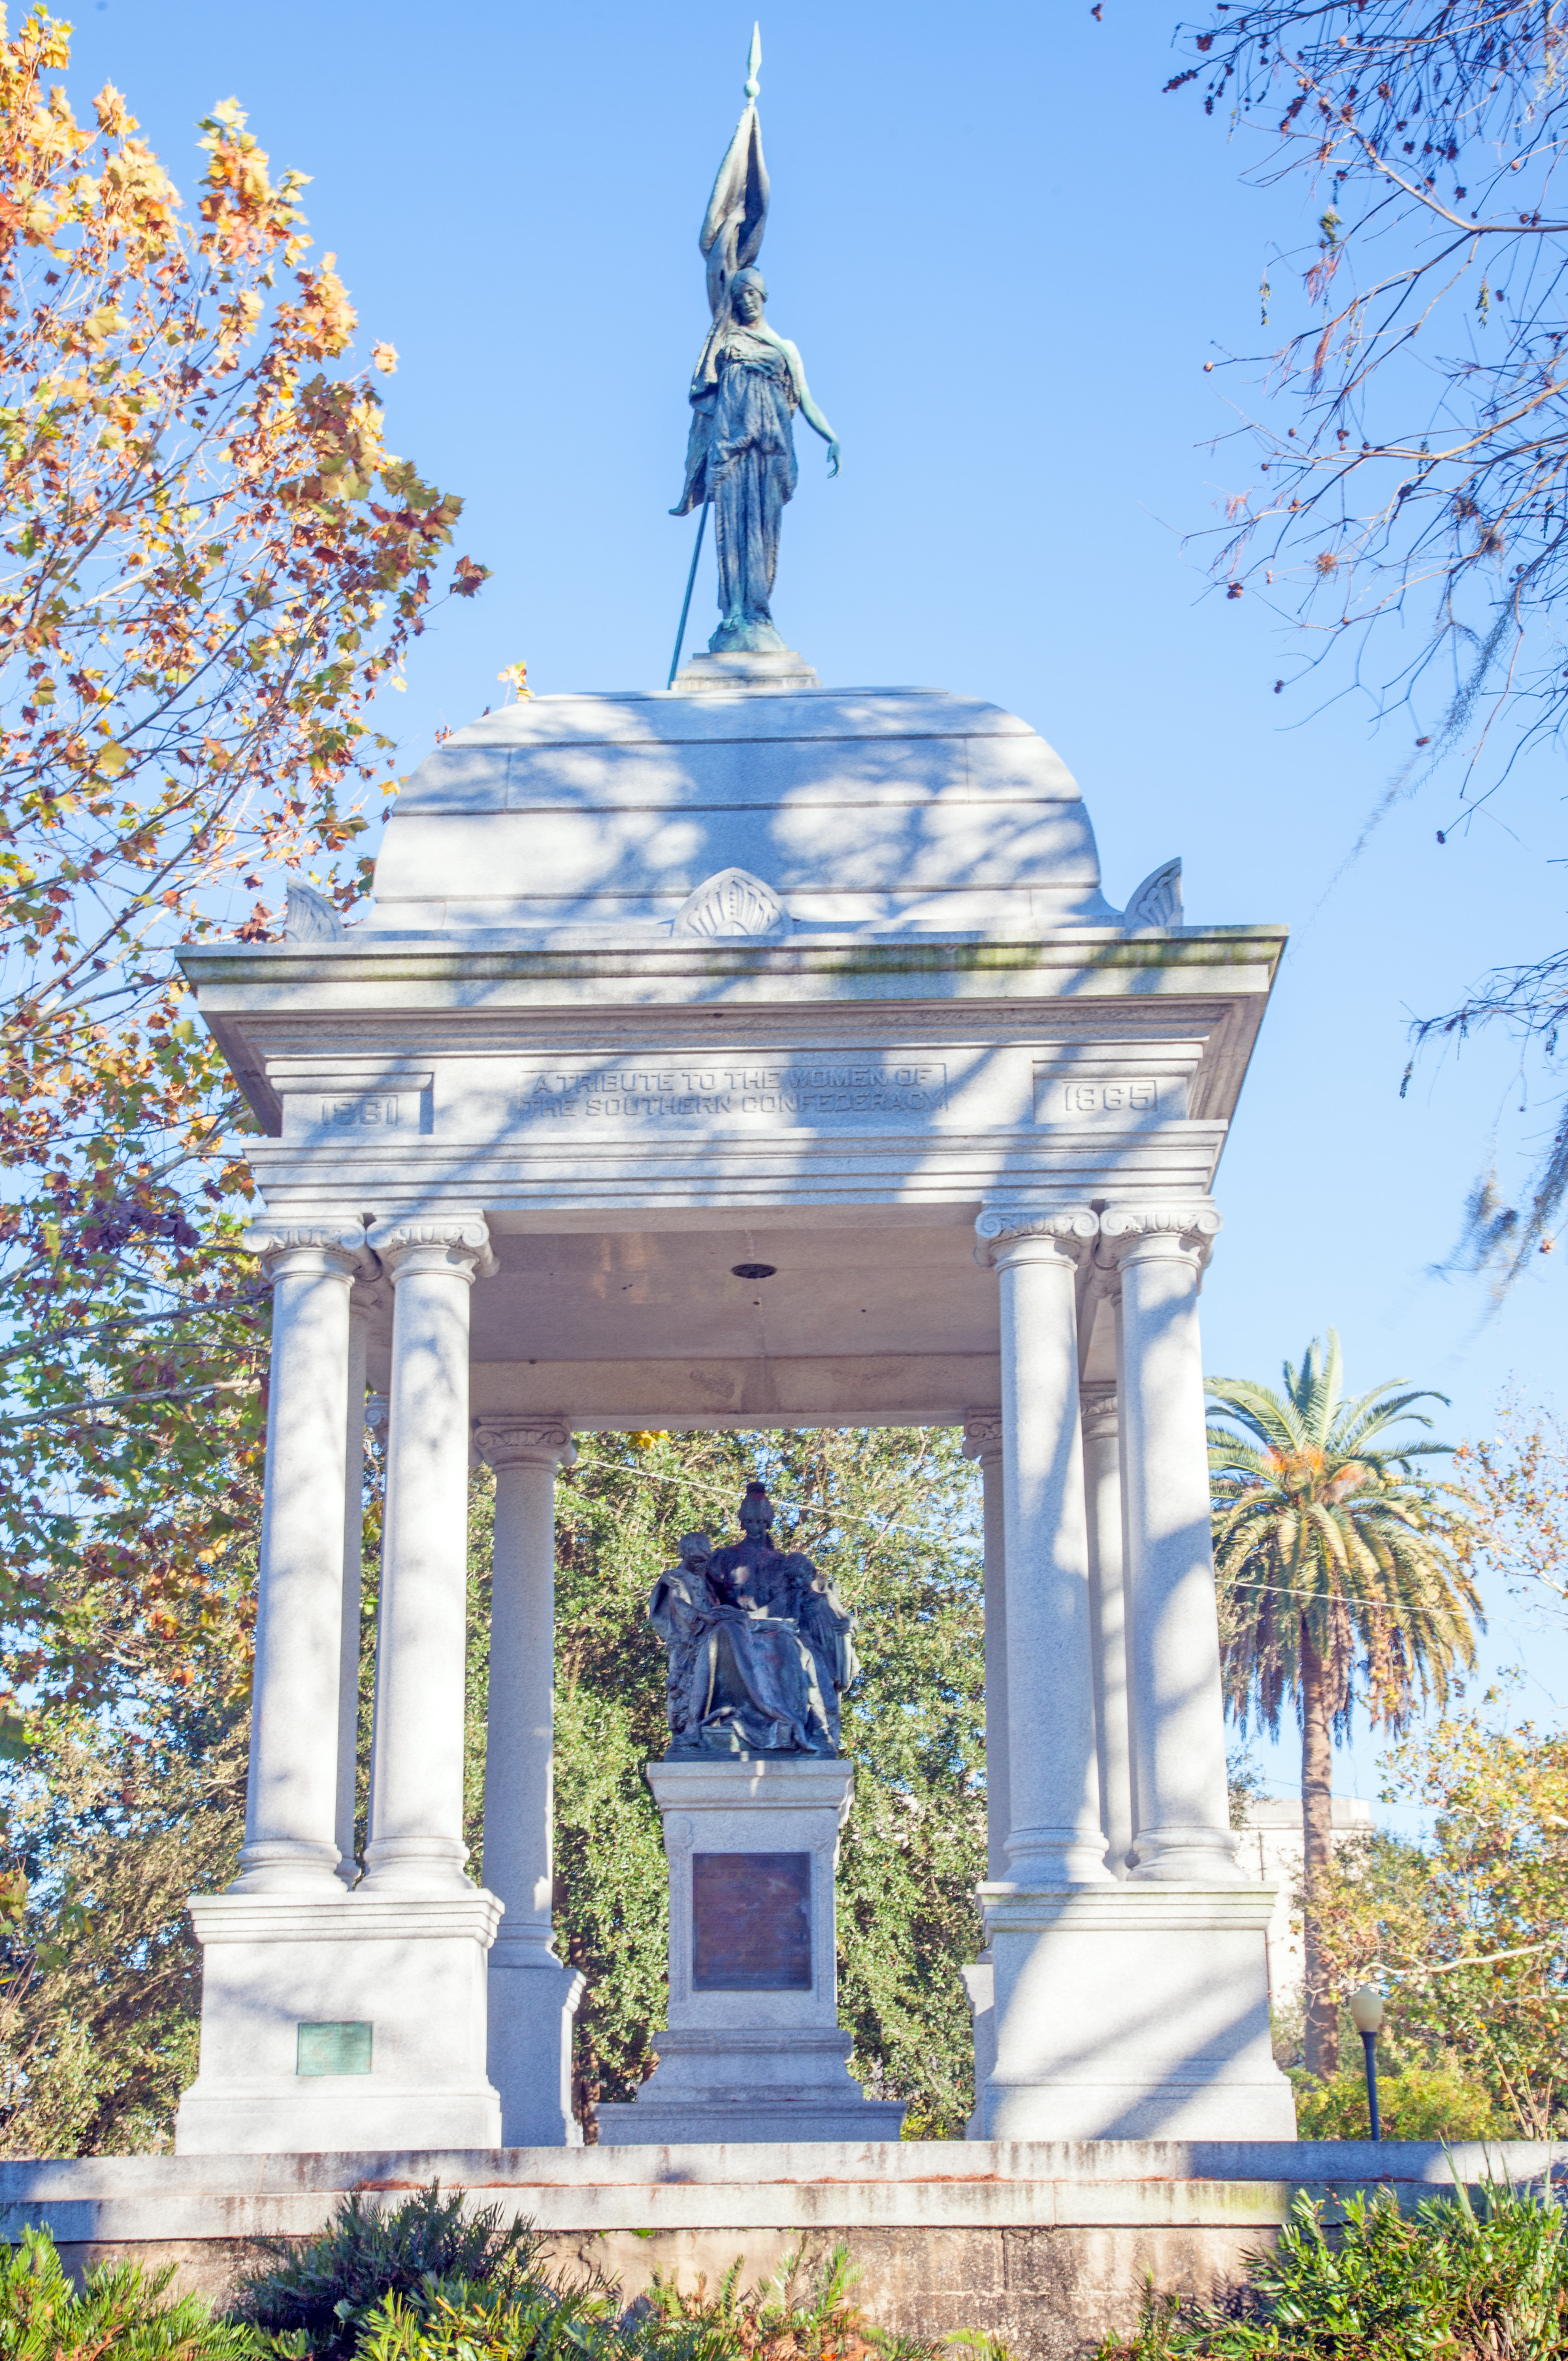 "A Tribute to the Women of the Southern Confederacy" monument, completed in 1915.